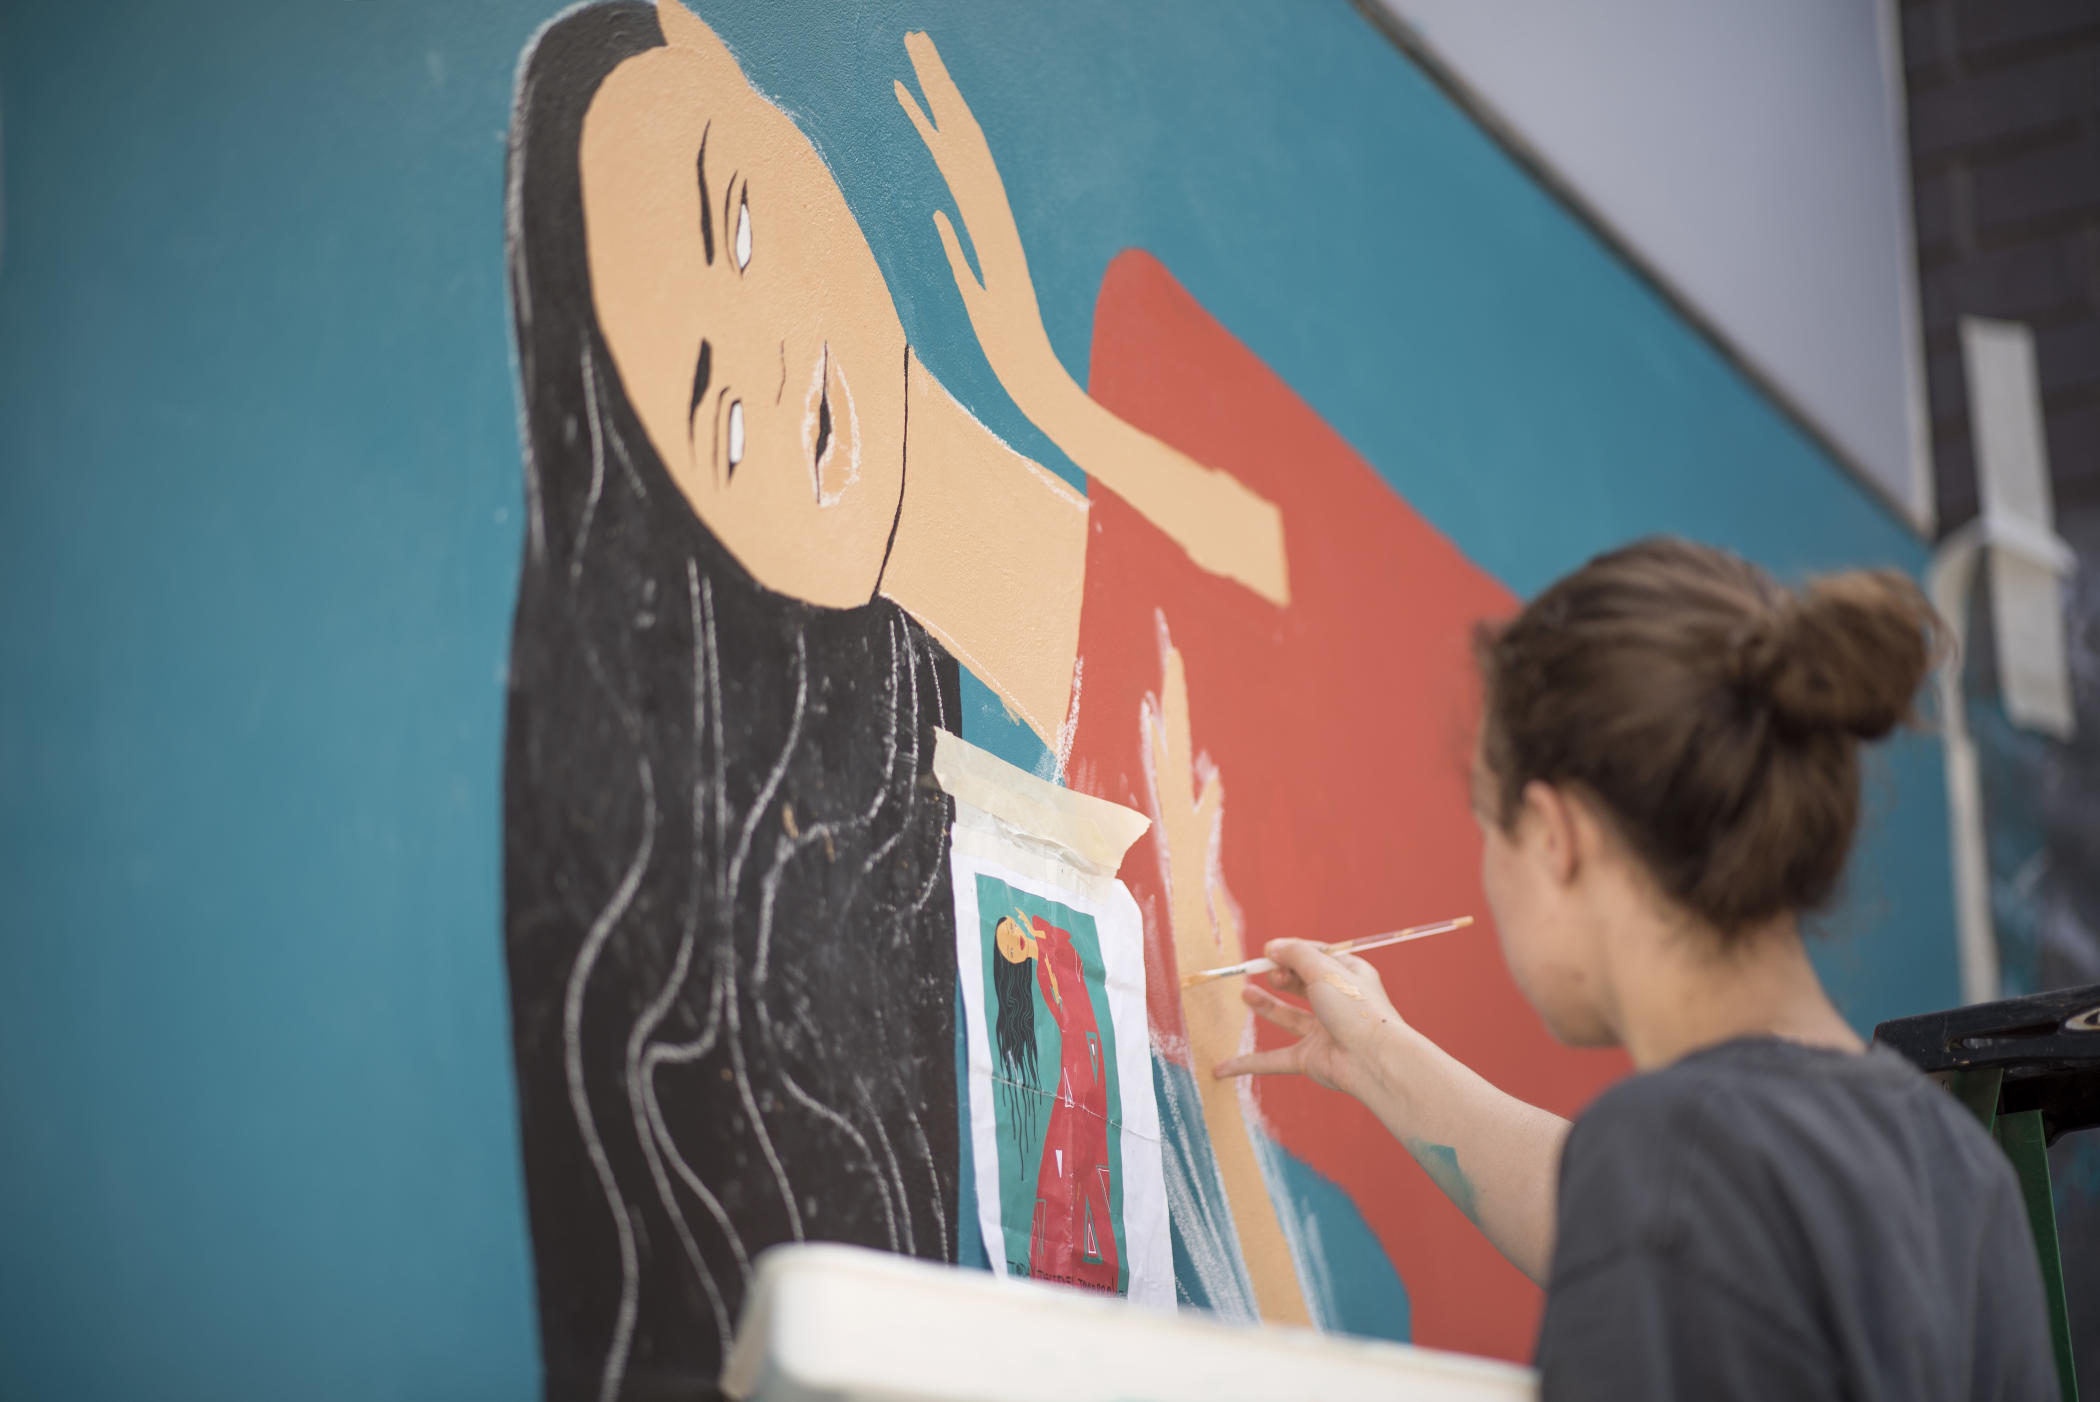 Autumn Robertson paints a mural of a woman on a campus wall.